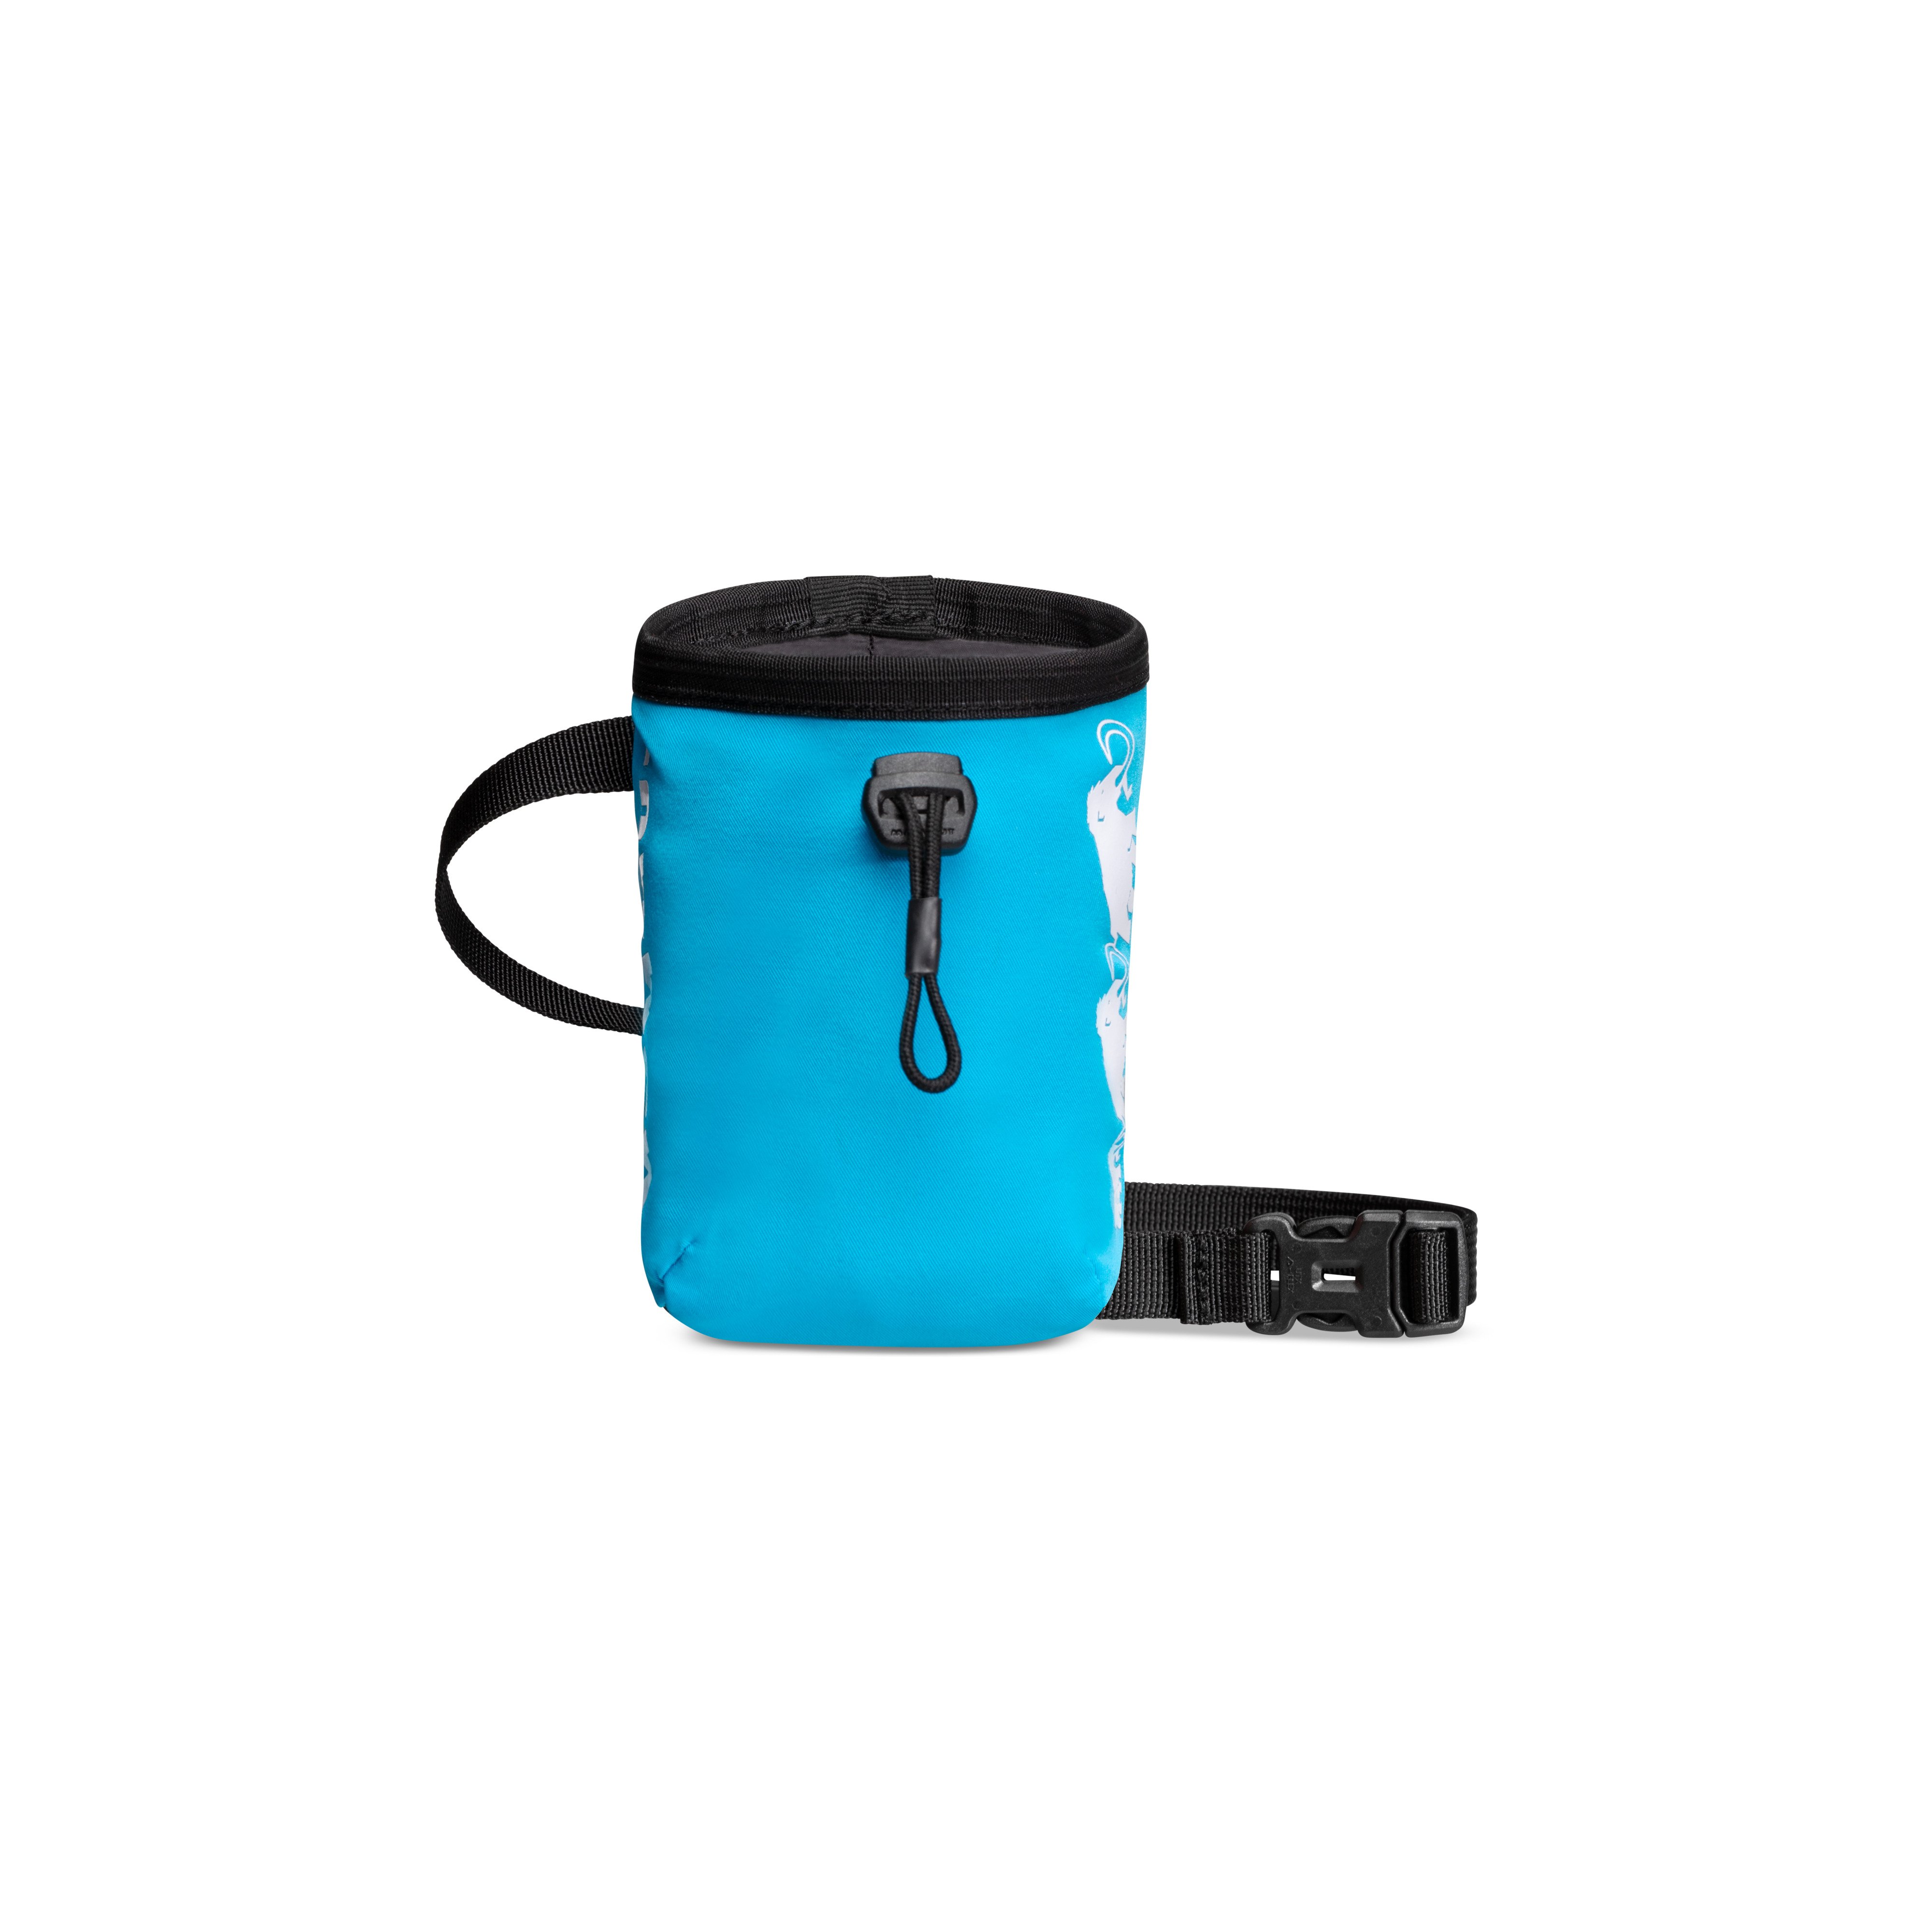 First Crag Chalk Bag - ocean, one size product image